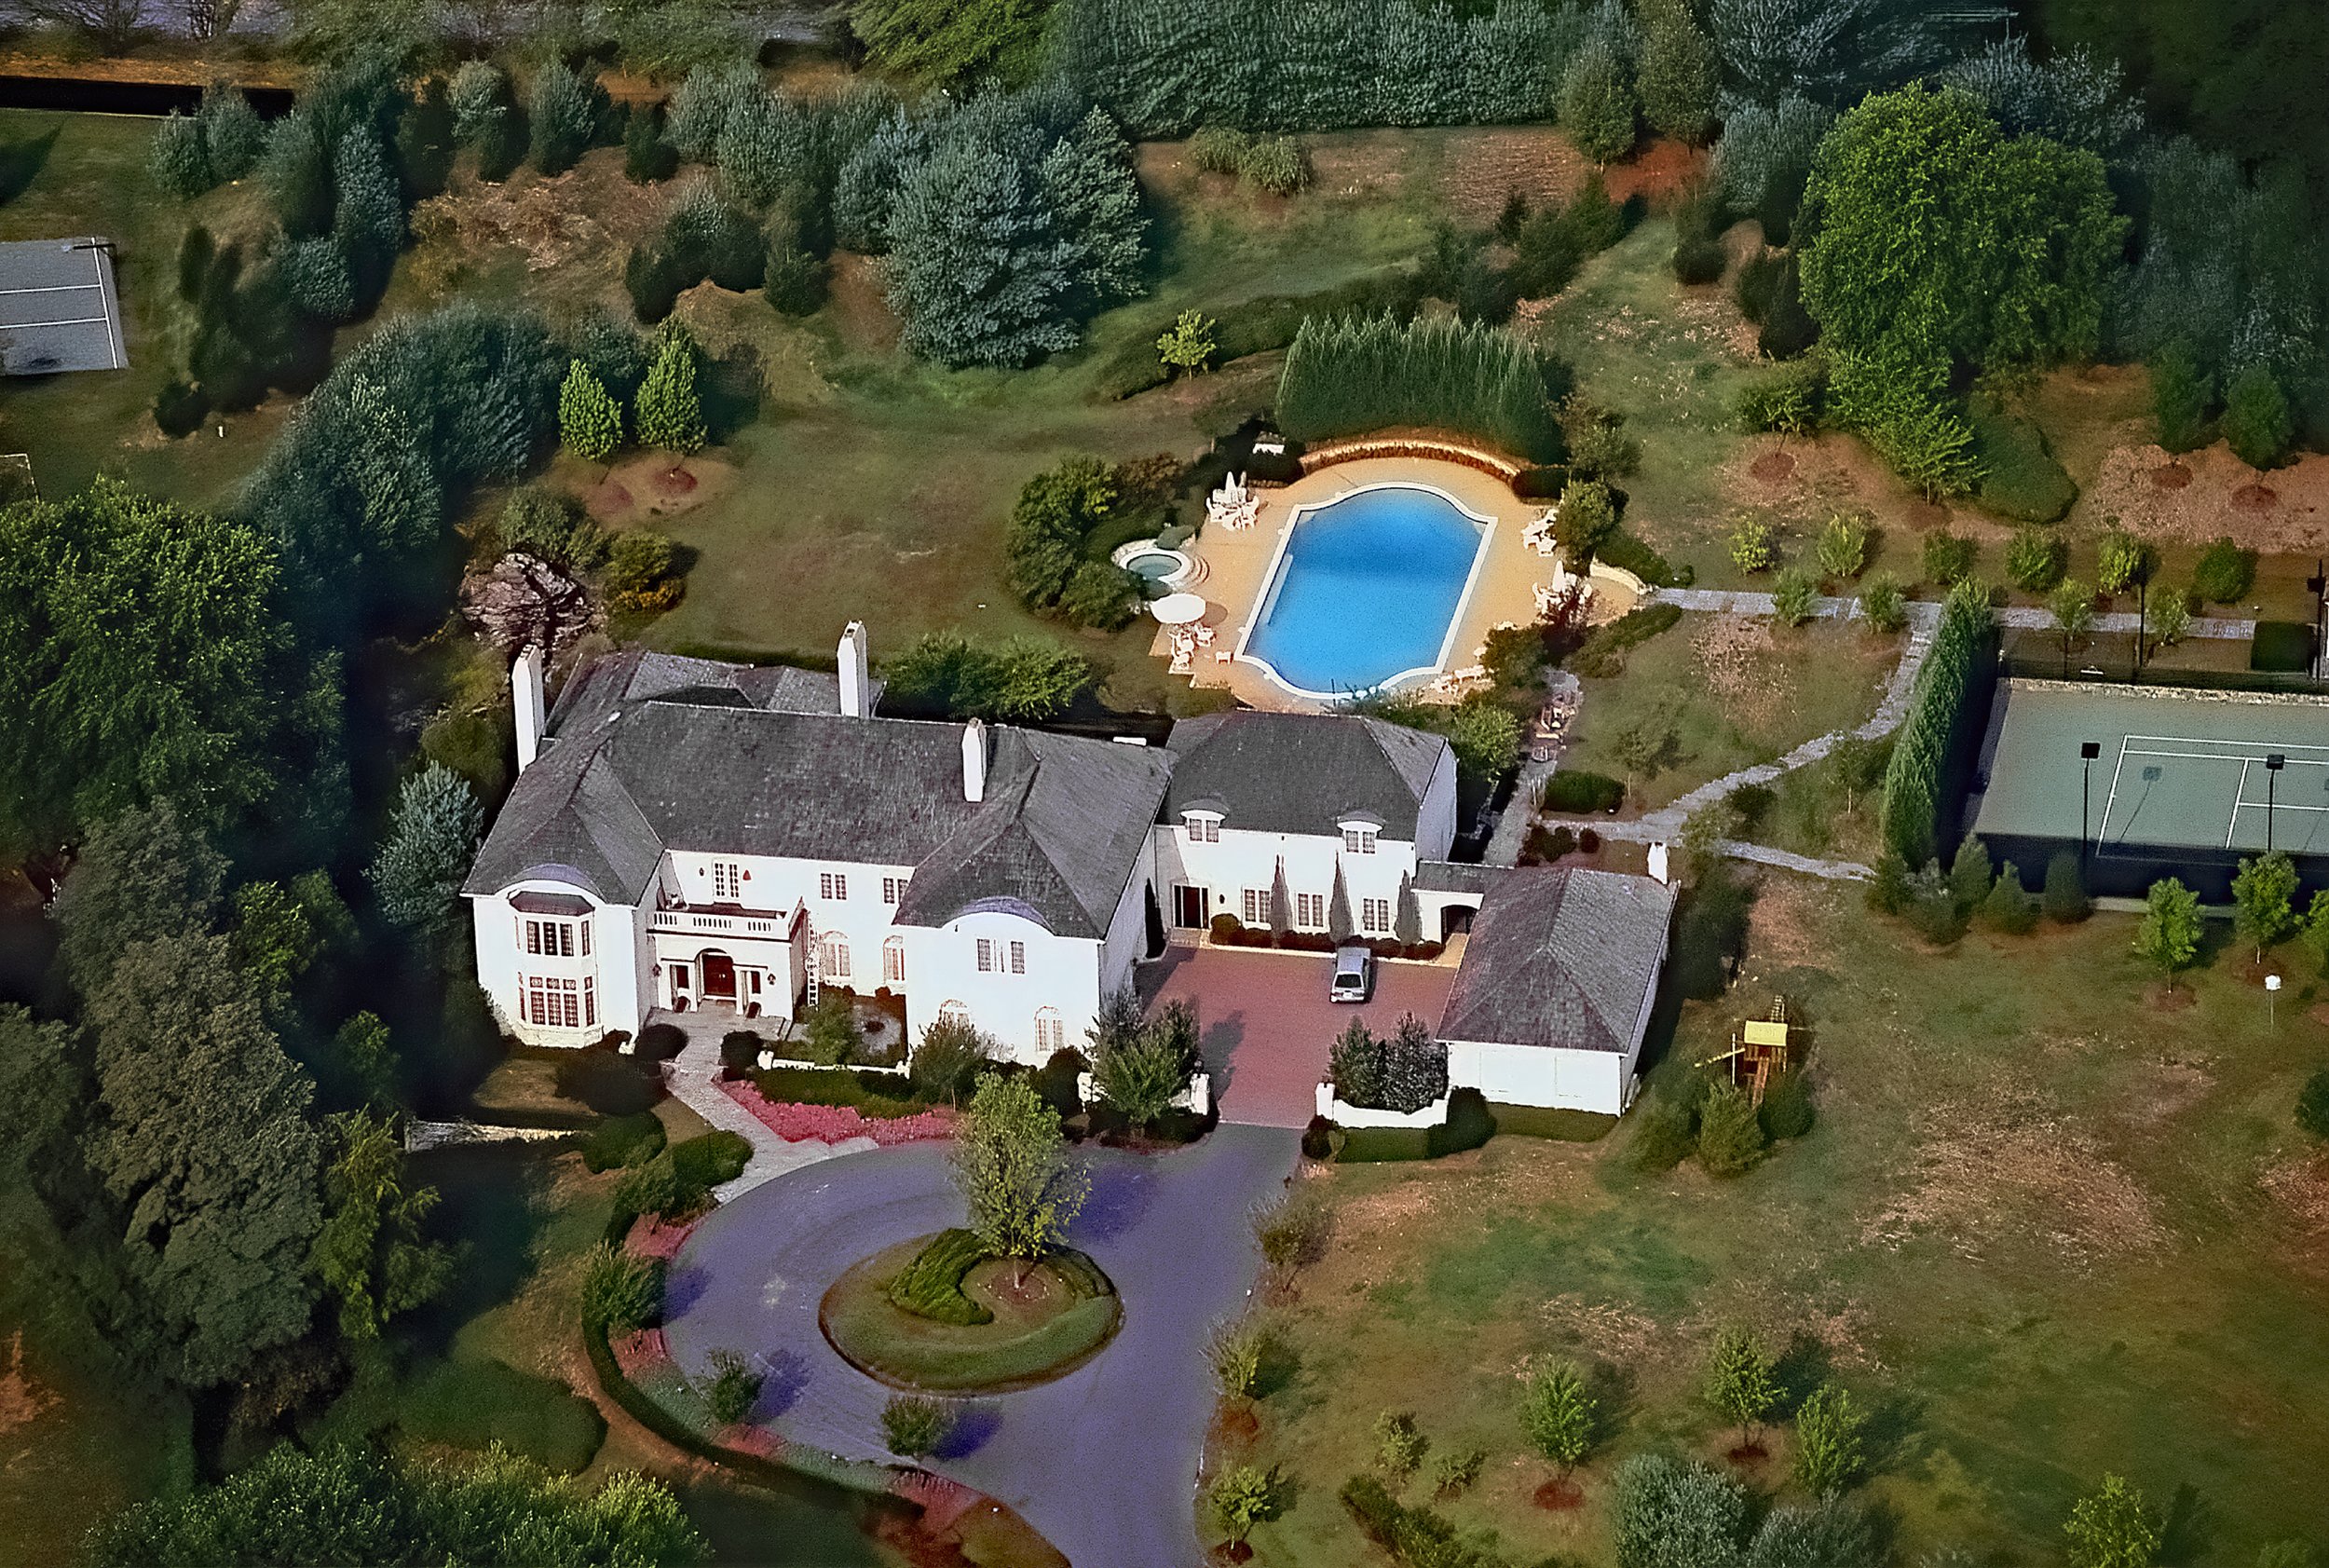 Aerial views of the estate home of Robert Altman and Lynda Carter that boasts a swimming pool, a hot tub, and a tennis court situated in Potomac Maryland taken in 1991 | Photo: Getty Images